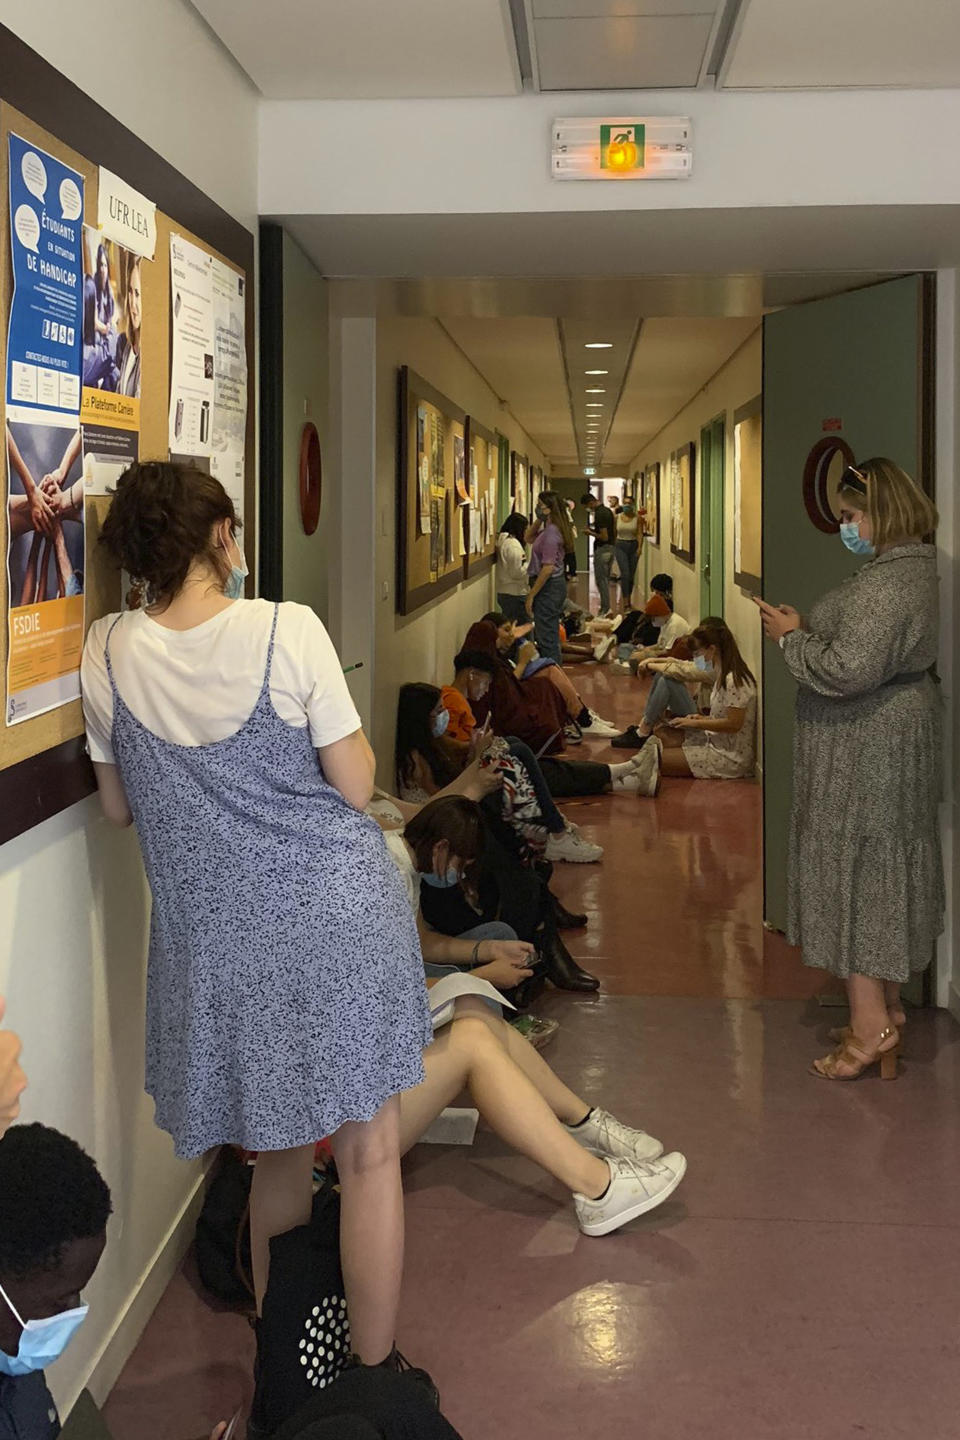 In this recent photo, students sit in a corridor at the Sorbonne university in Paris. In the century-old lecture theaters of the Sorbonne university in Paris, students are so numerous that some need to sit on the stairs, all wearing a mask but worried about not respecting physical distance that is normally required amid the virus crisis. (Vicky Setruck via AP)